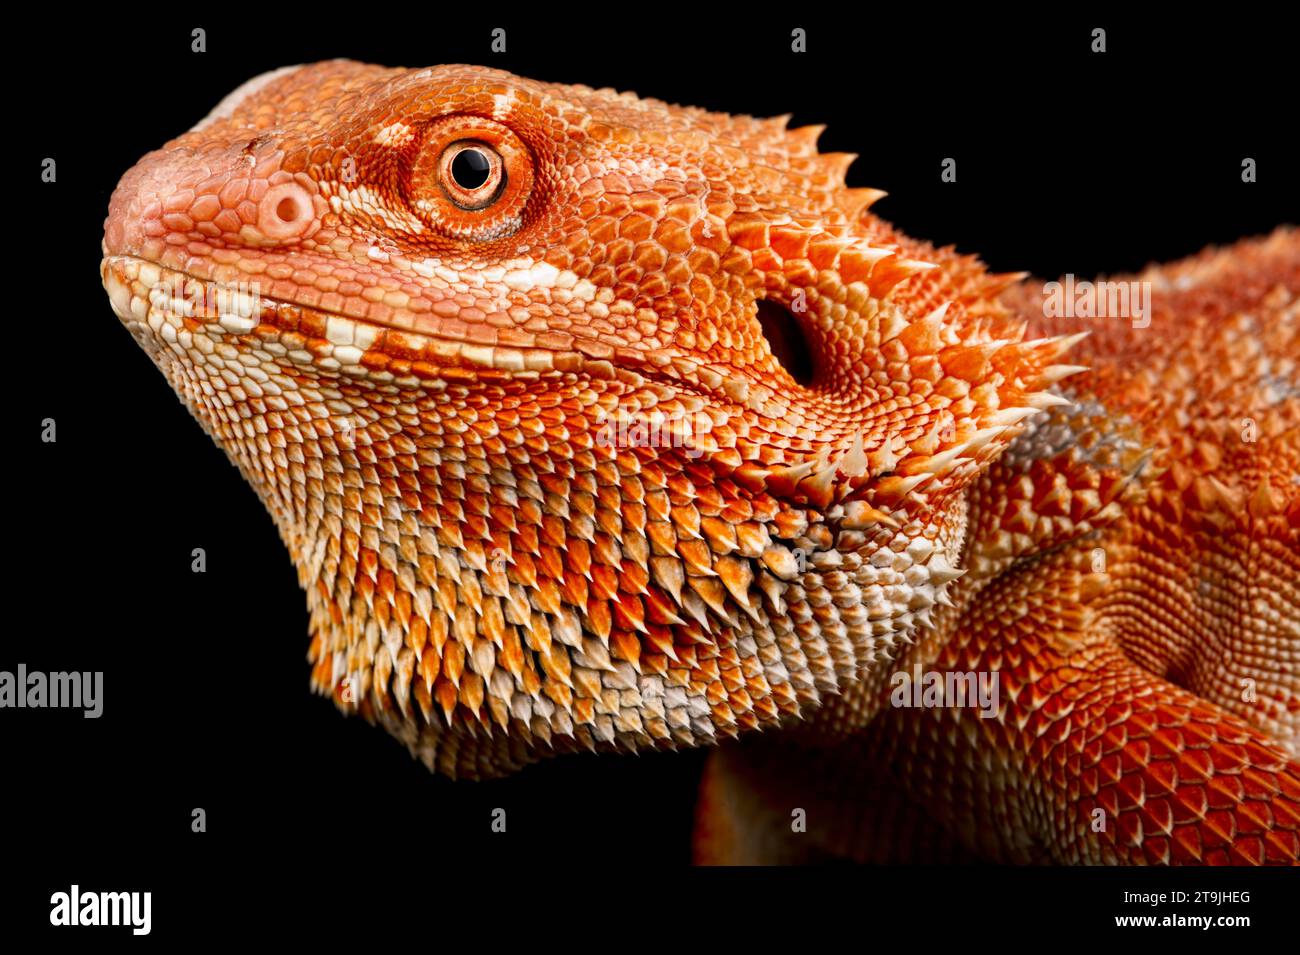 The Bearded Dragon (Pogona vitticeps) is one of the most popular pet lizard species in the world. Stock Photo